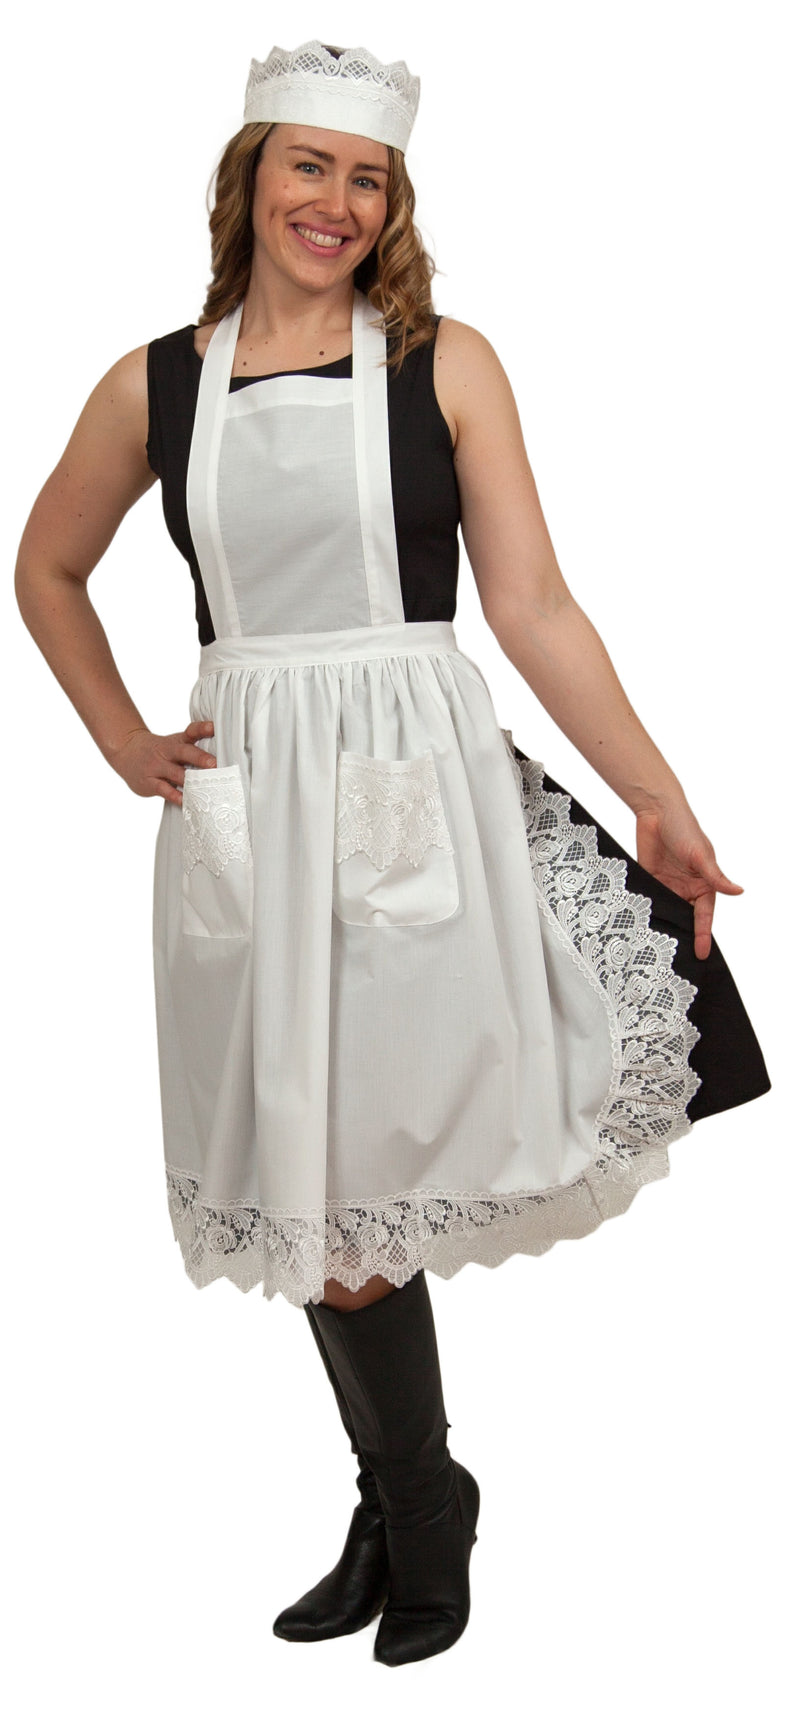 Maid Costume inches White Lace Headband & Adult Full Lace Apron Costume - Apparel- Aprons, Apparel-Kitchenware, CT-700, Hats, Lace